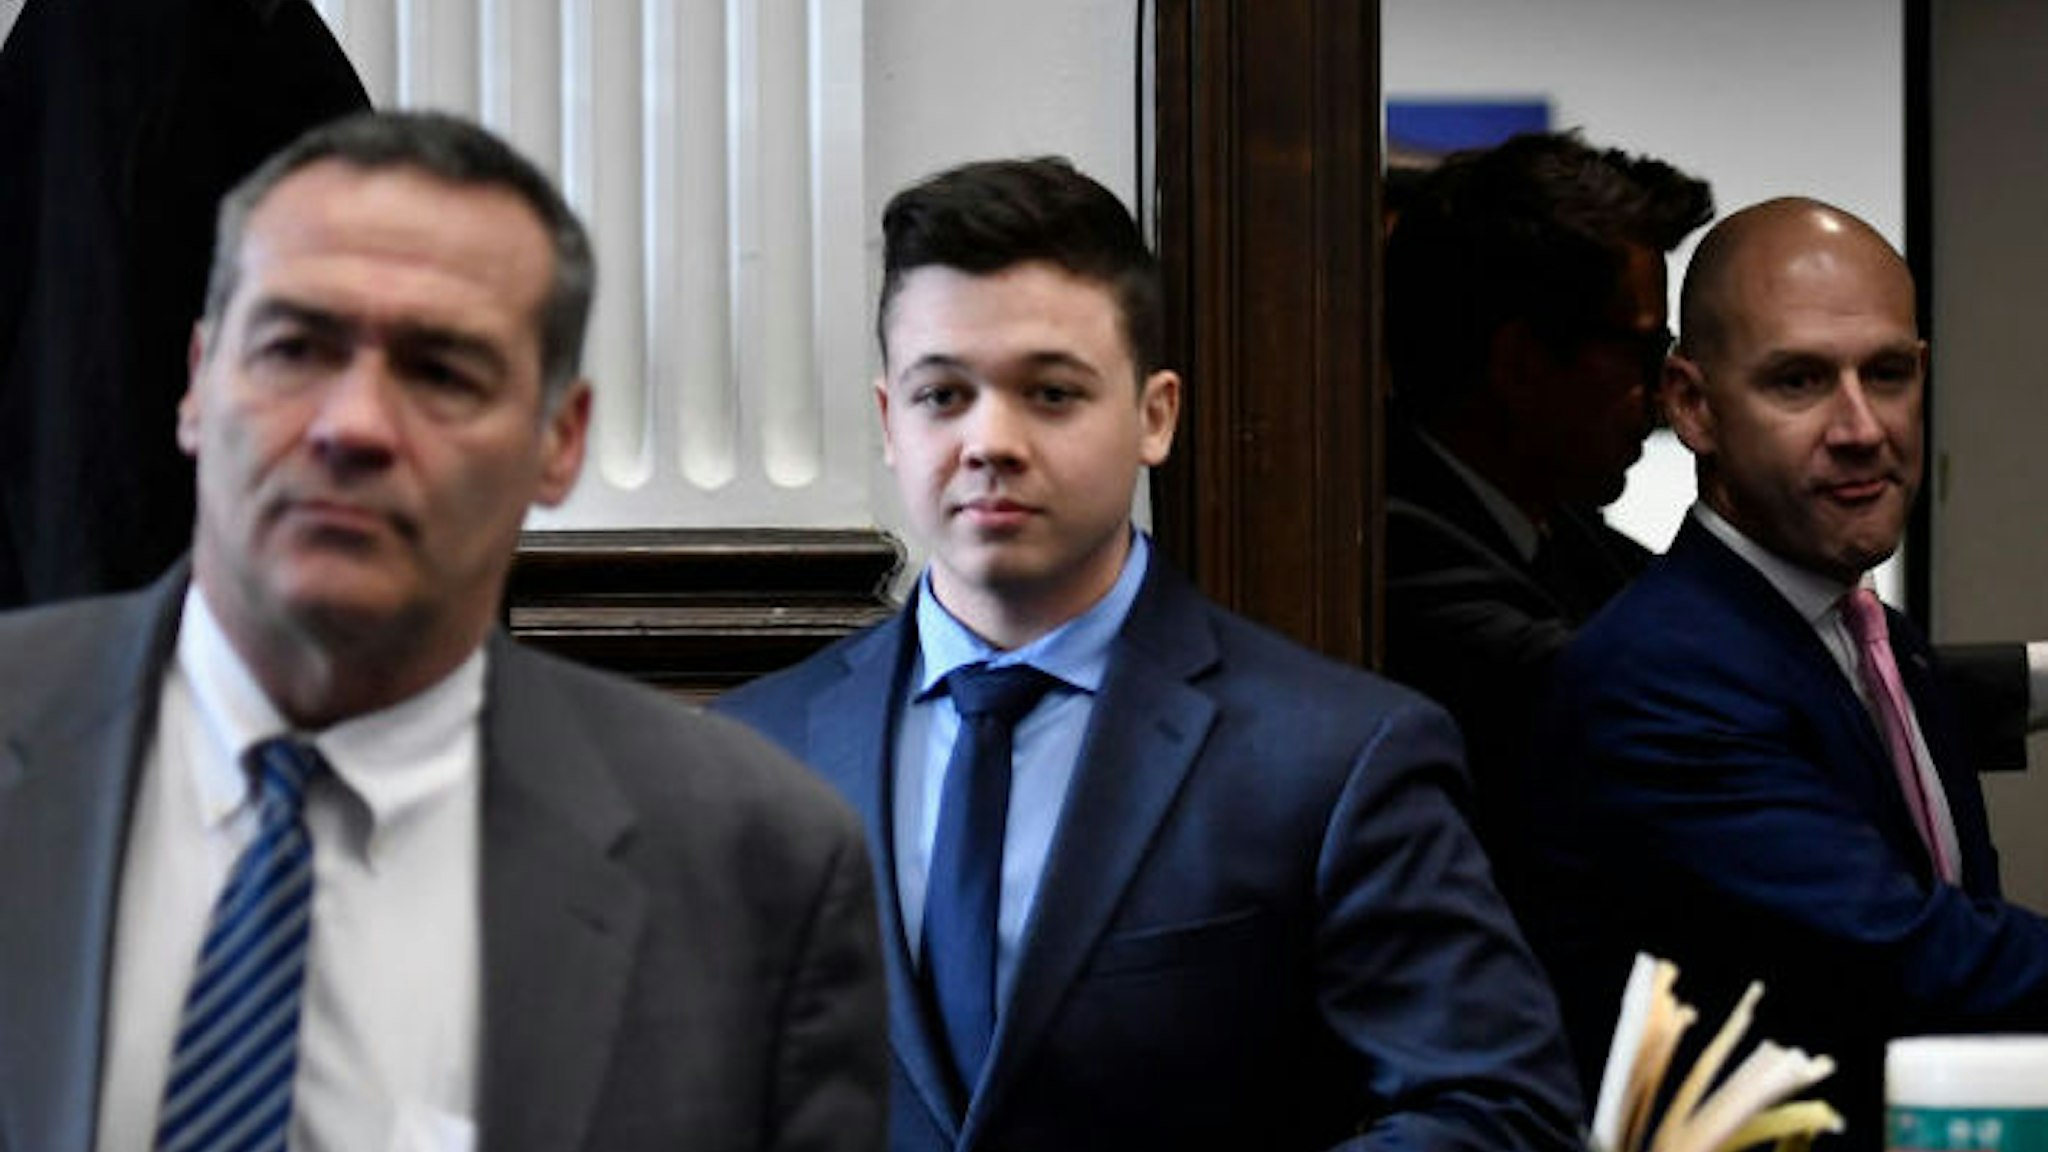 Kyle Rittenhouse, center, enters the courtroom with his attorneys Mark Richards, left, and Corey Chirafisi for a meeting called by Judge Bruce Schroeder at the Kenosha County Courthouse on November 18, 2021 in Kenosha, Wisconsin.